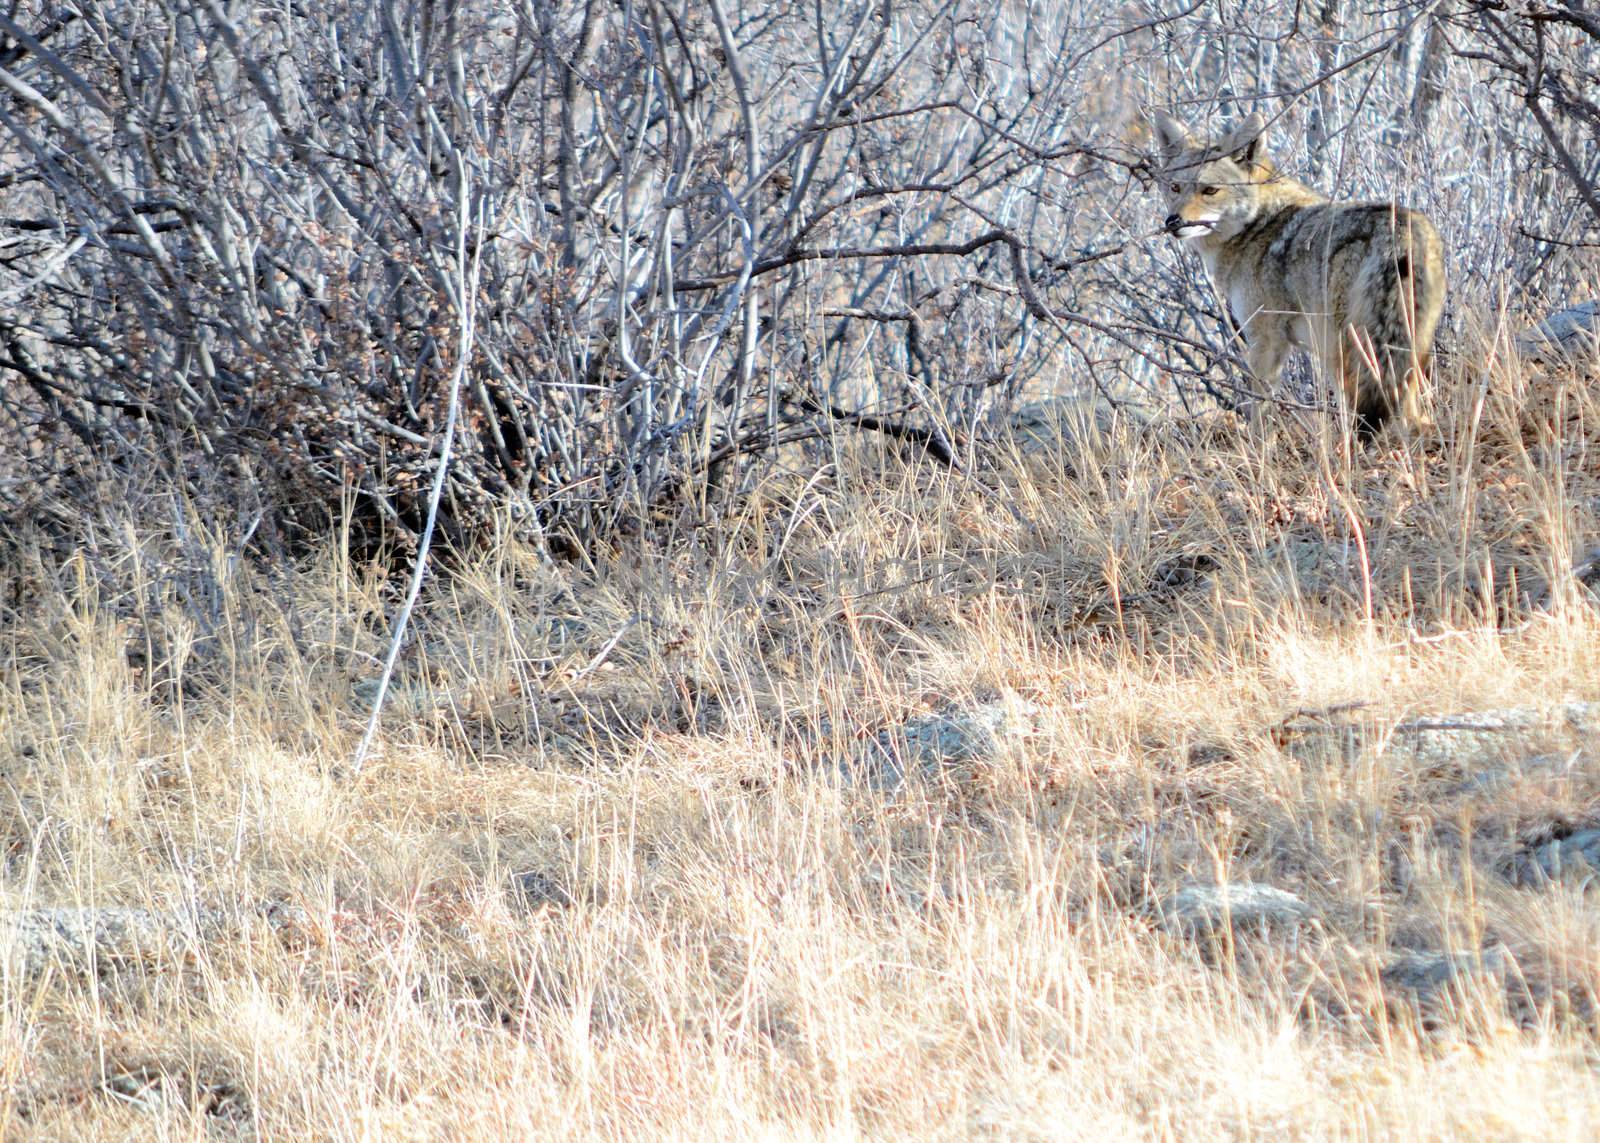 Coyote in a thicket looking for the prey that got away.